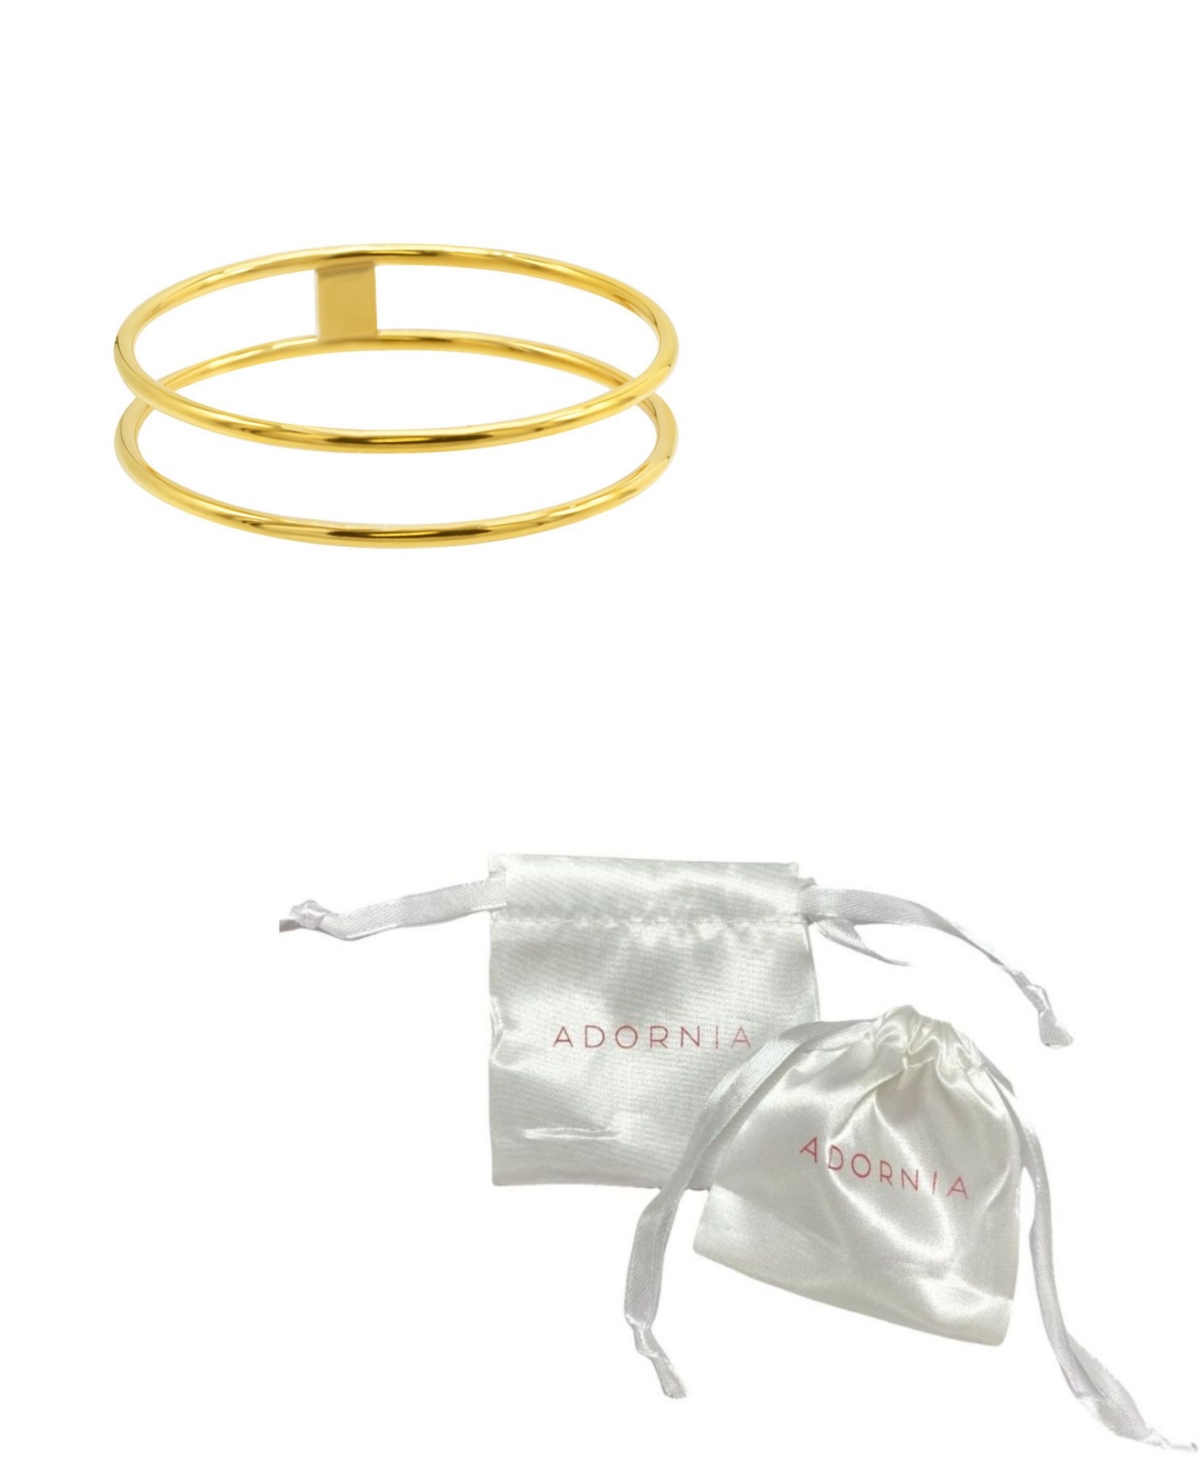 Shop Adornia Tarnish Resistant 14k Gold-plated Stainless Steel Double Row Bangle Bracelet